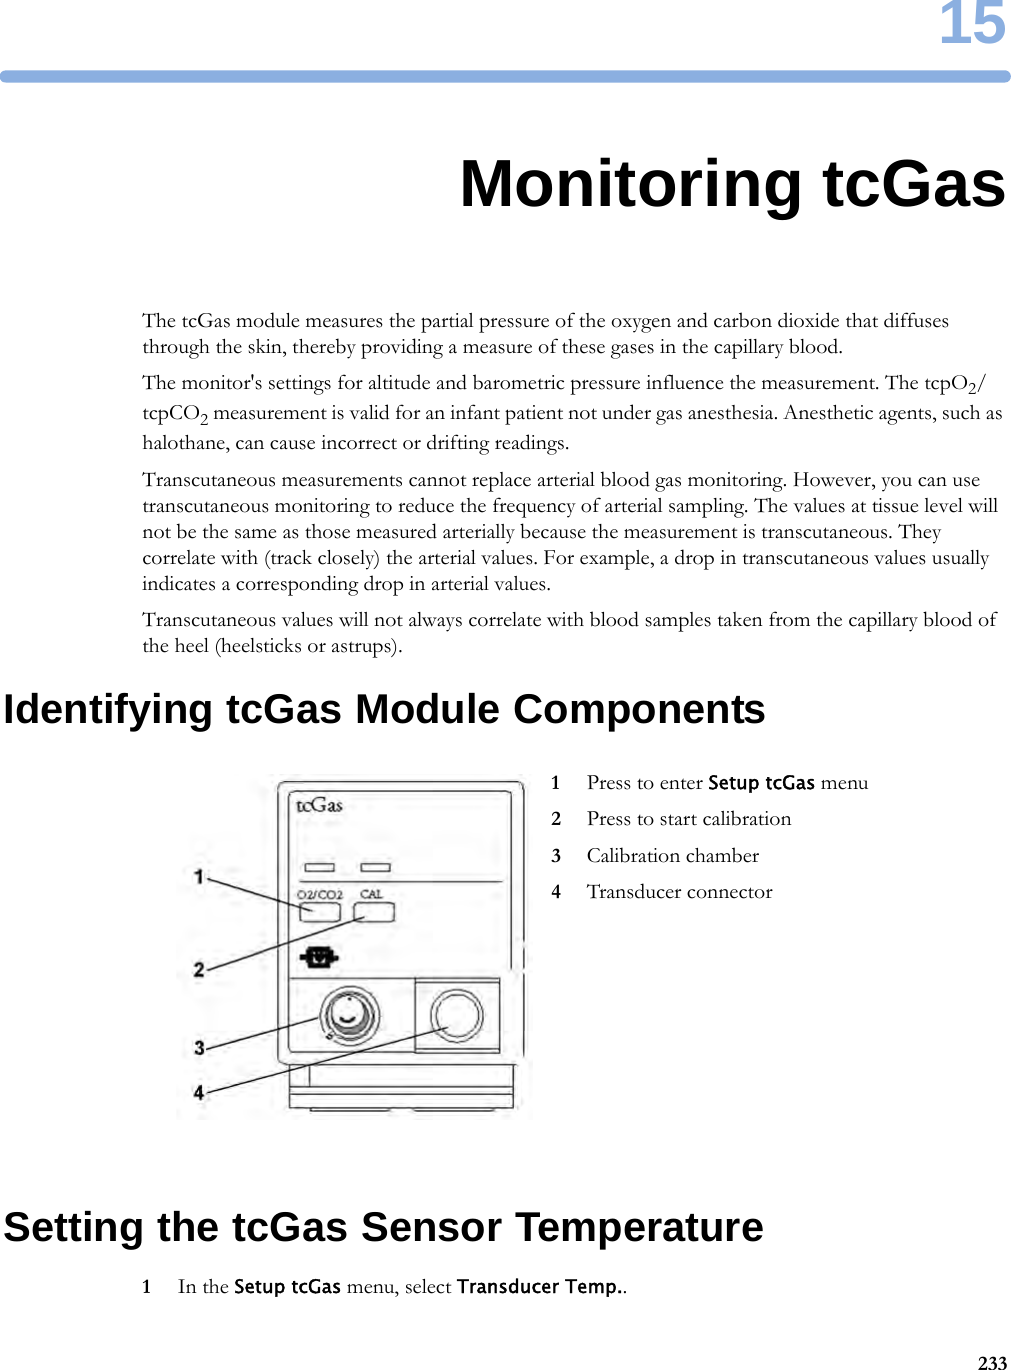 1523315Monitoring tcGasThe tcGas module measures the partial pressure of the oxygen and carbon dioxide that diffuses through the skin, thereby providing a measure of these gases in the capillary blood.The monitor&apos;s settings for altitude and barometric pressure influence the measurement. The tcpO2/tcpCO2 measurement is valid for an infant patient not under gas anesthesia. Anesthetic agents, such as halothane, can cause incorrect or drifting readings.Transcutaneous measurements cannot replace arterial blood gas monitoring. However, you can use transcutaneous monitoring to reduce the frequency of arterial sampling. The values at tissue level will not be the same as those measured arterially because the measurement is transcutaneous. They correlate with (track closely) the arterial values. For example, a drop in transcutaneous values usually indicates a corresponding drop in arterial values.Transcutaneous values will not always correlate with blood samples taken from the capillary blood of the heel (heelsticks or astrups).Identifying tcGas Module ComponentsSetting the tcGas Sensor Temperature1In the Setup tcGas menu, select Transducer Temp..1Press to enter Setup tcGas menu2Press to start calibration3Calibration chamber4Transducer connector